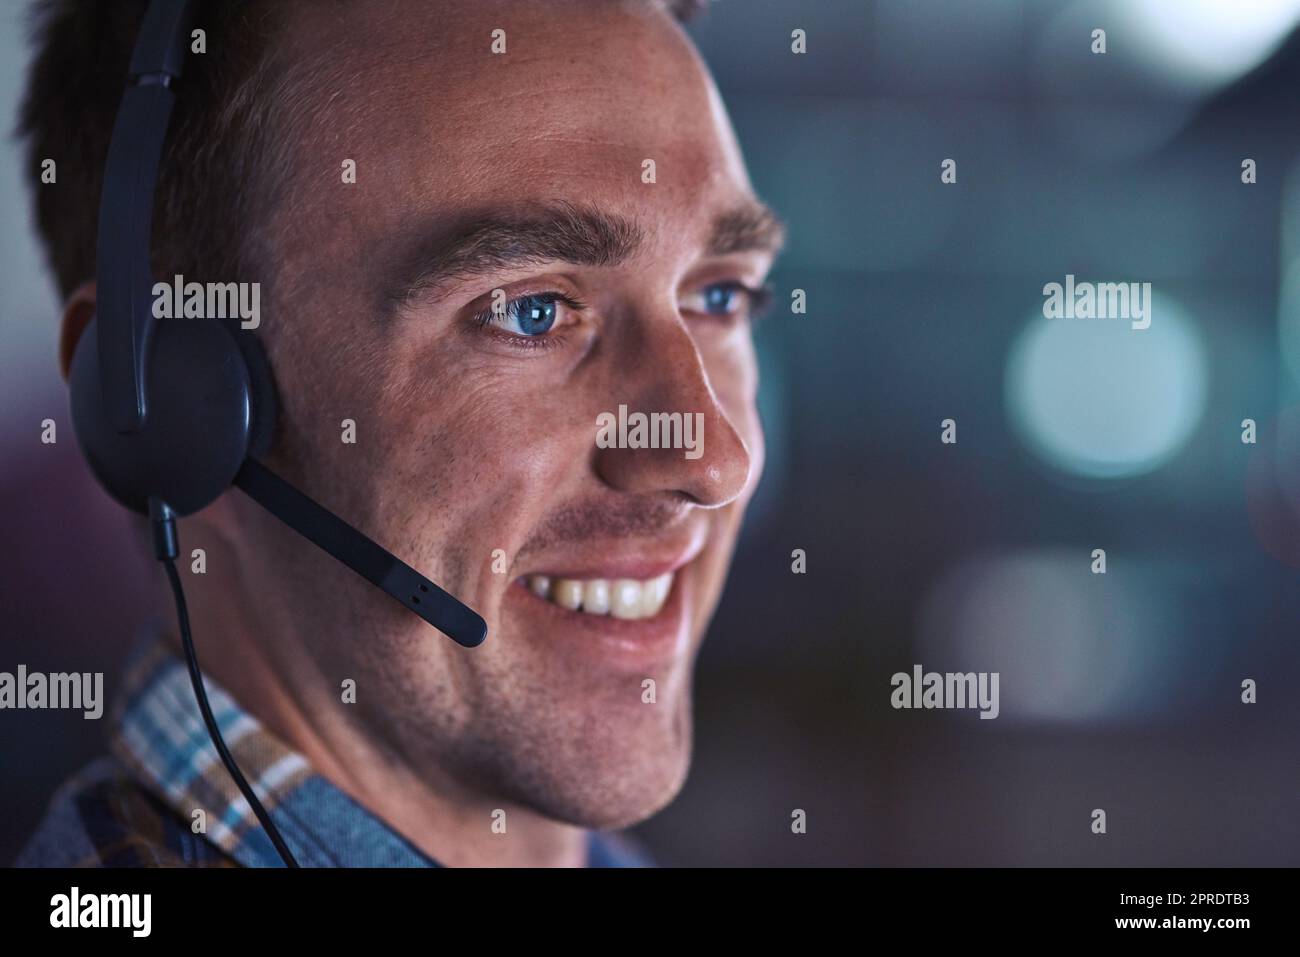 Call center agent smiling, looking happy and friendly while working in an office alone at work. Face of a positive, thinking and professional customer service agent, helpdesk operator or employee Stock Photo